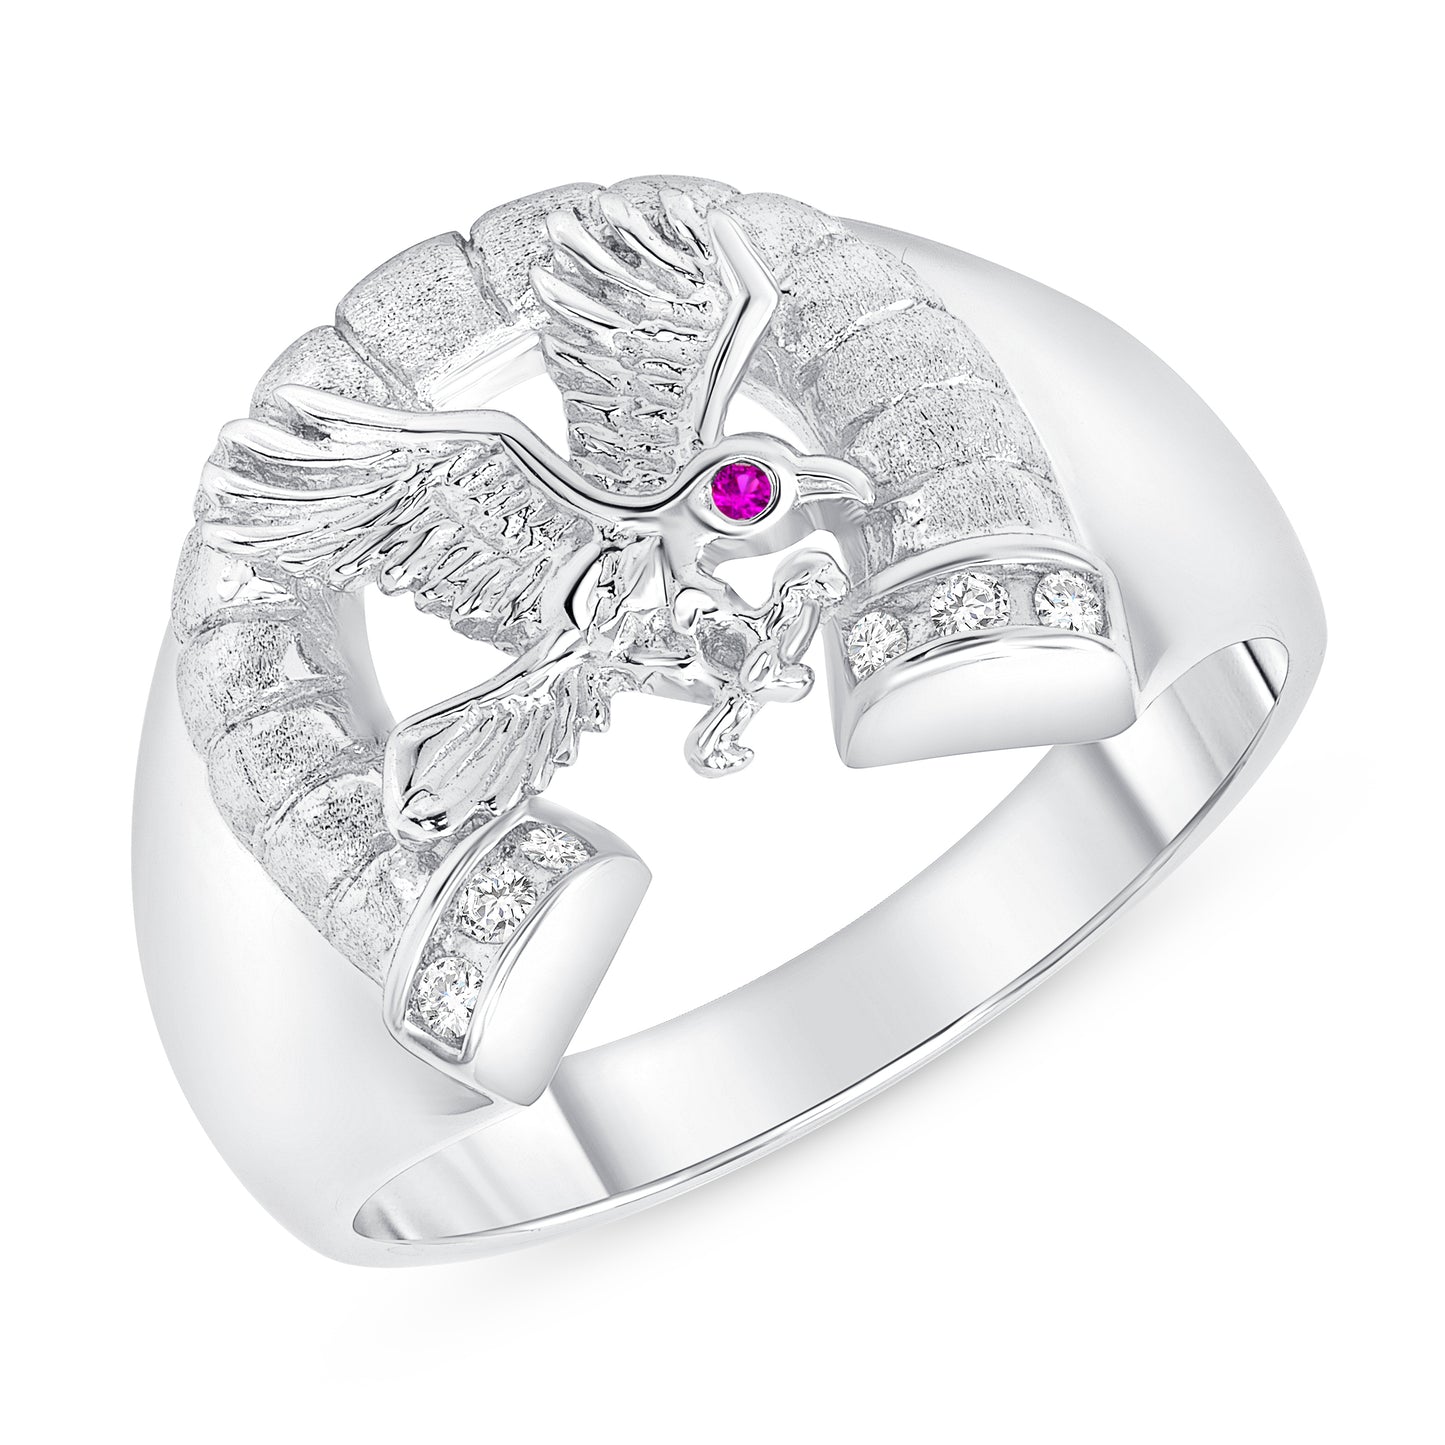 Silver 925 Rhodium Plated Cubic Zirconia Eagle Ring. DGR2025R